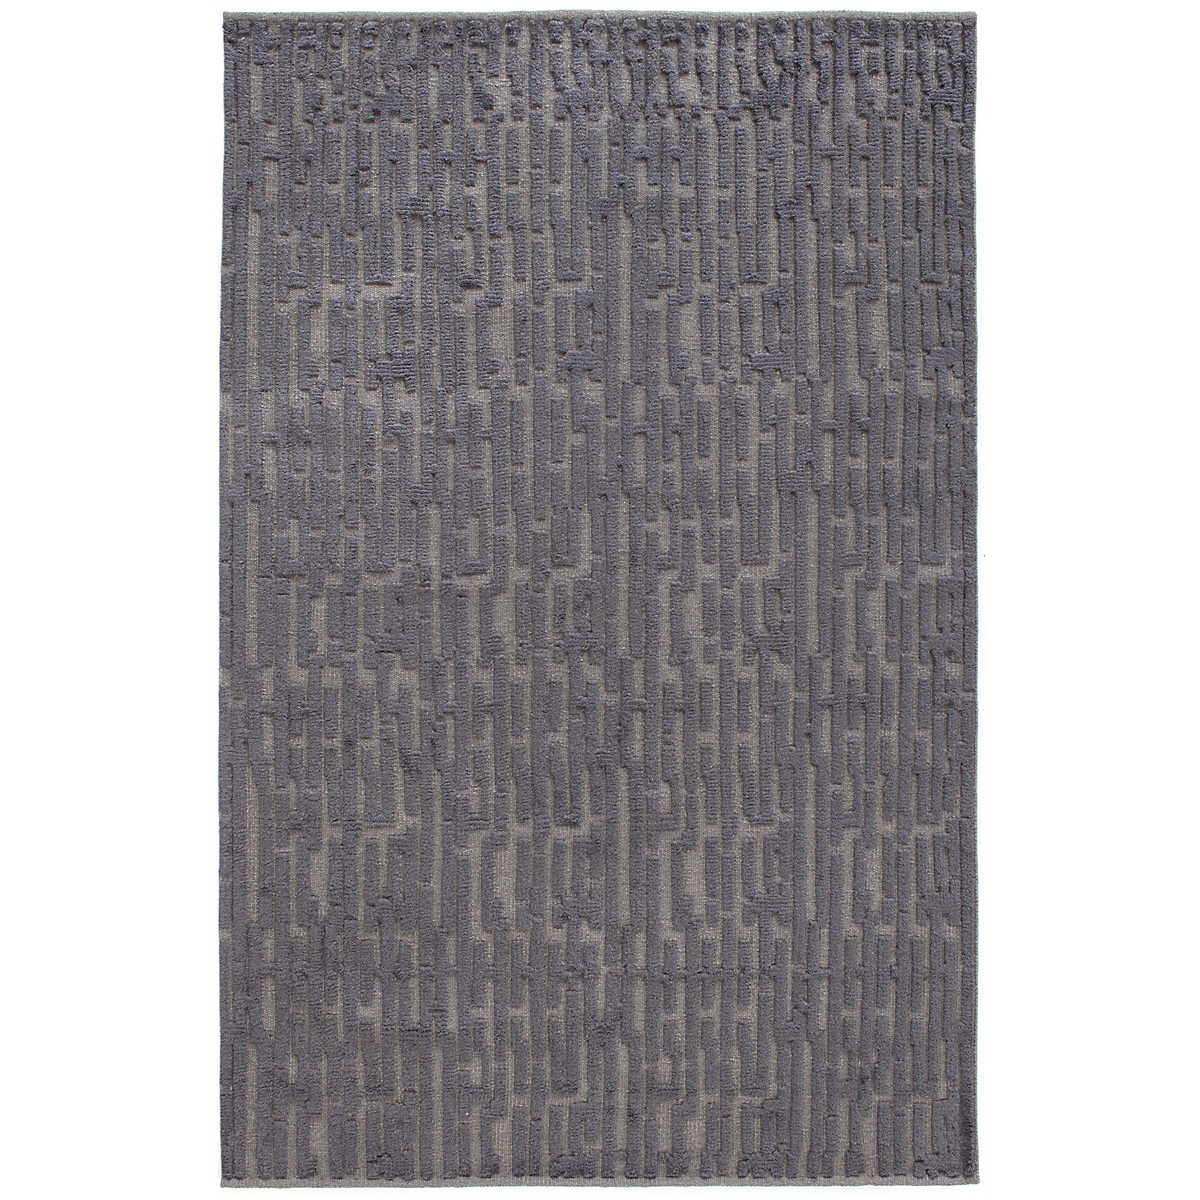 The Gates Metal Rug sophisticated hand-knotted wool rug demonstrates unique textures inspired by nature. The luxe labyrinth is hand-knotted with lush wool to make a raised grid pattern of plushness, then hand sheared. The resulting subtle variations of pile height are only found in artisanally produced rugs. Amethyst Home provides interior design services, furniture, rugs, and lighting in the Seattle metro area.